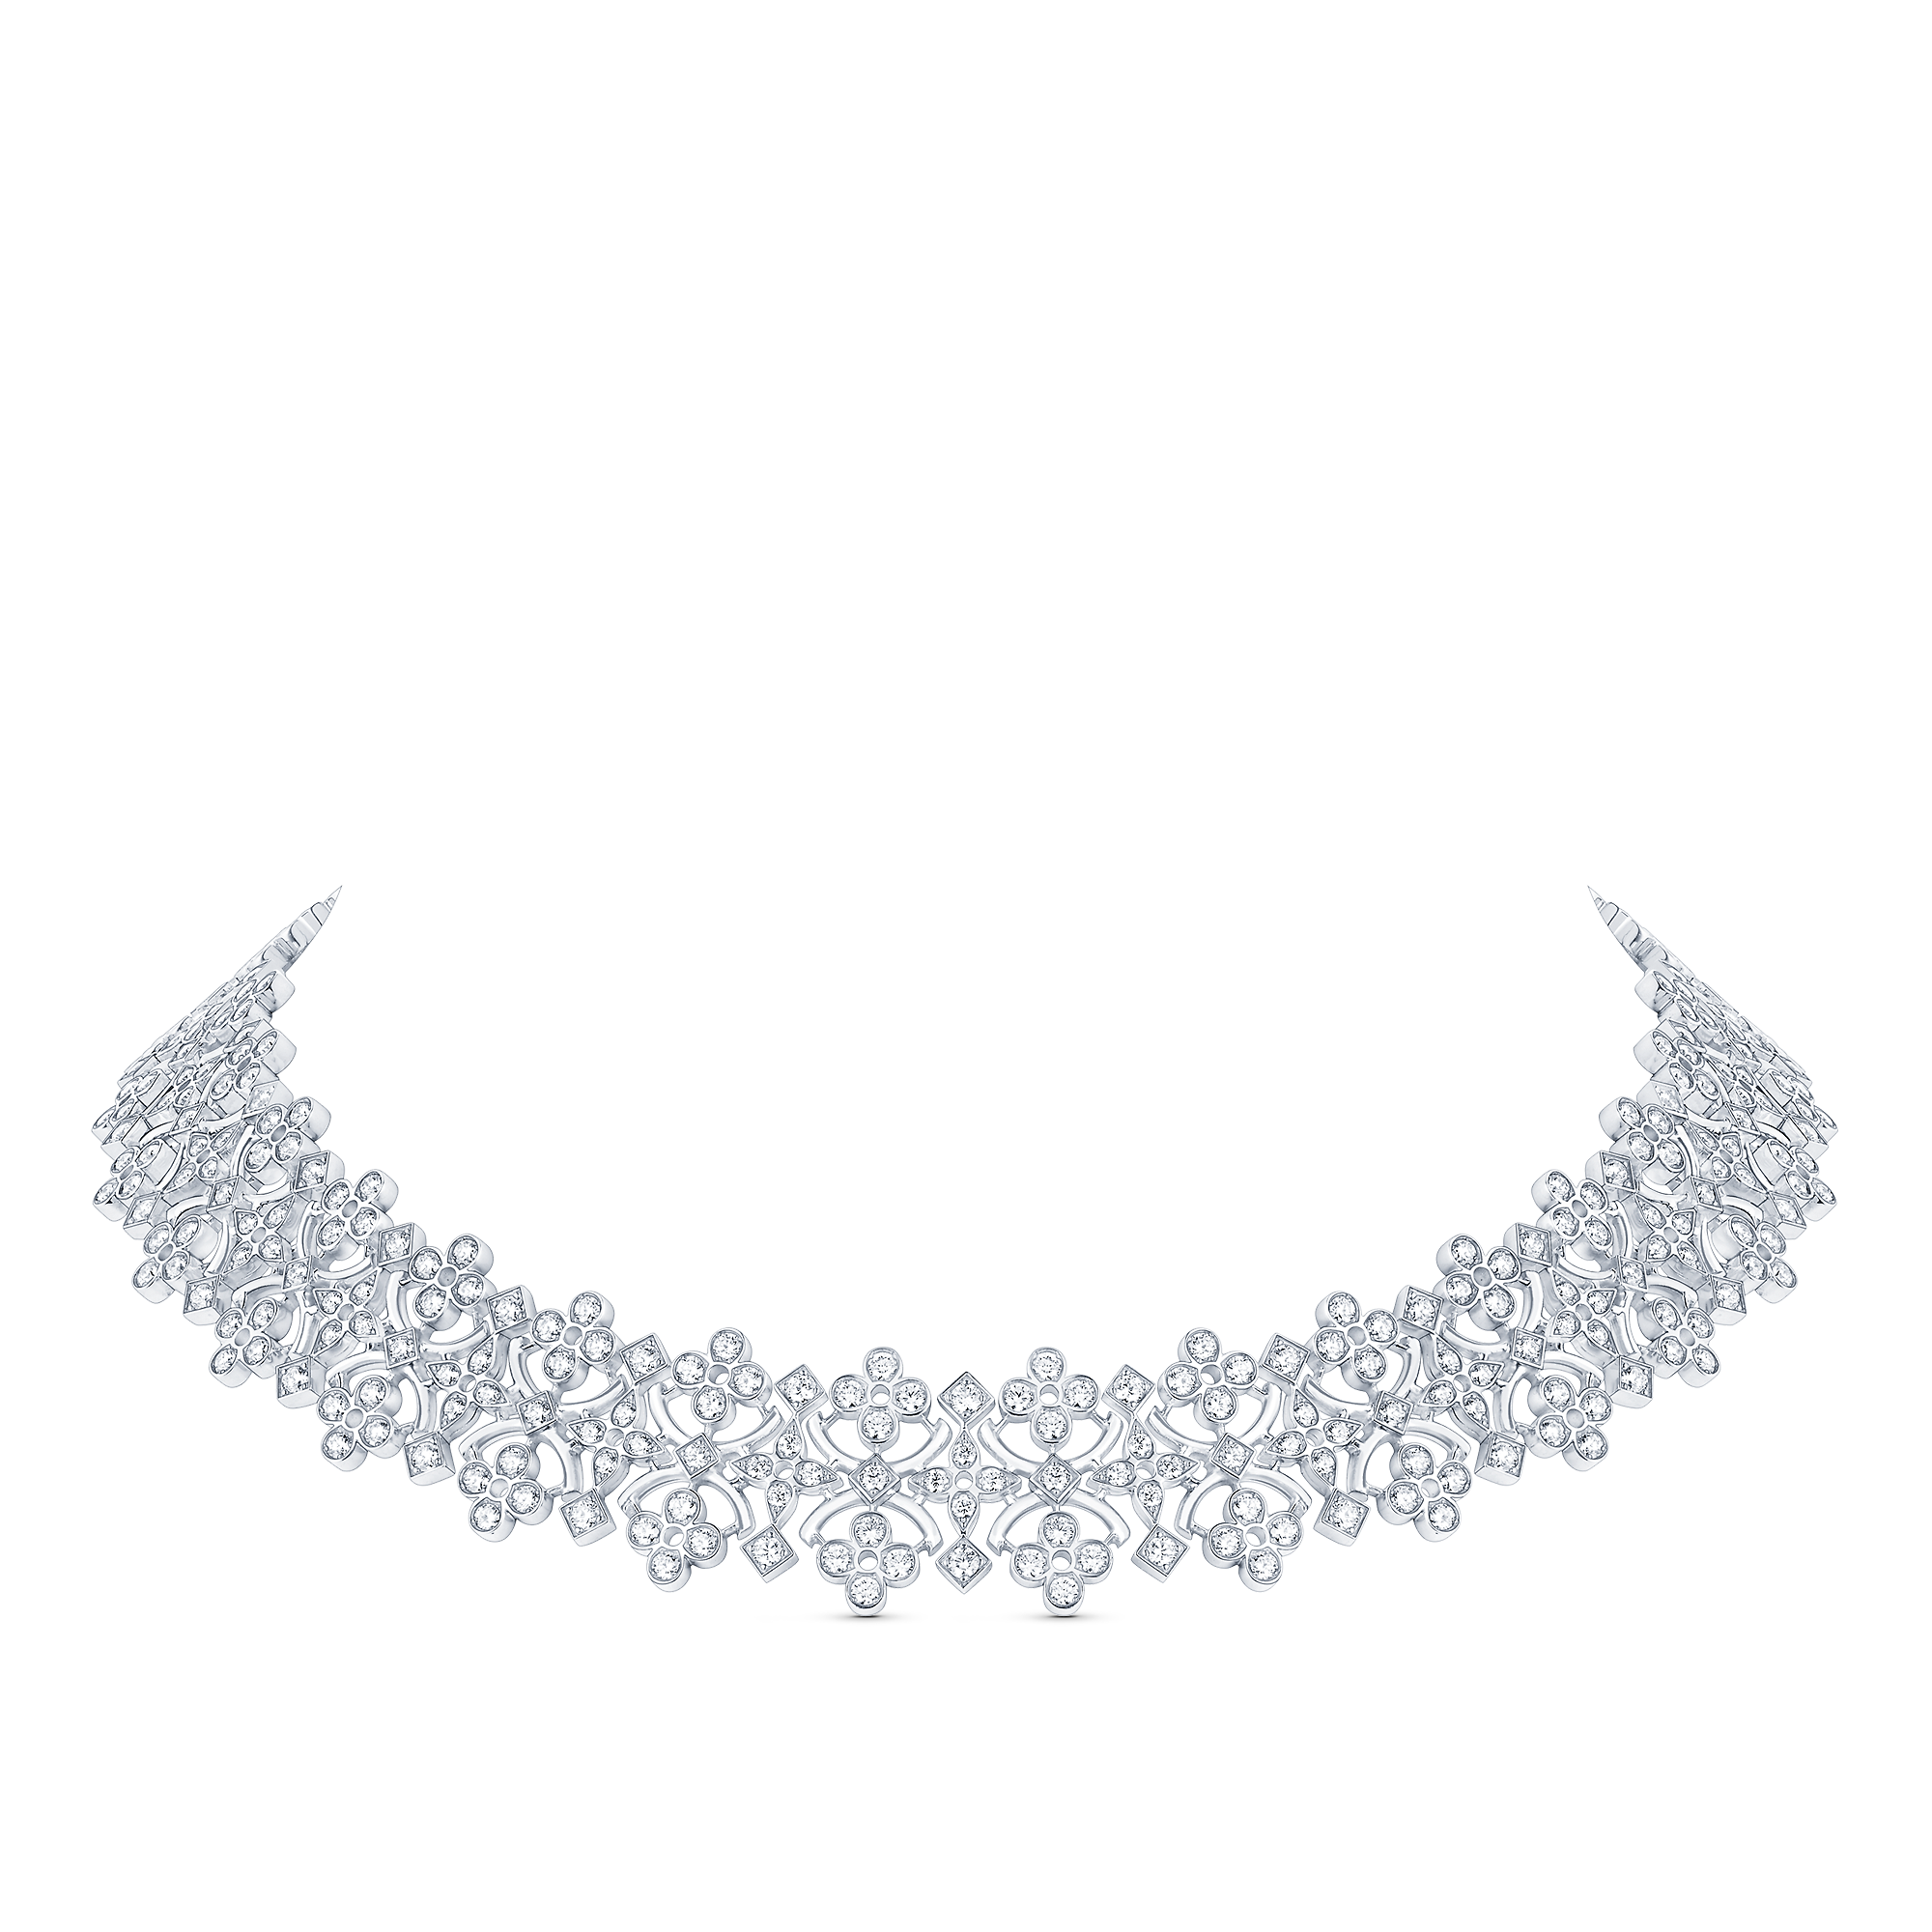 Louis Vuitton Dentelle Masterpiece Necklace, White Gold And Diamonds – Jewelry – Categories Q94380